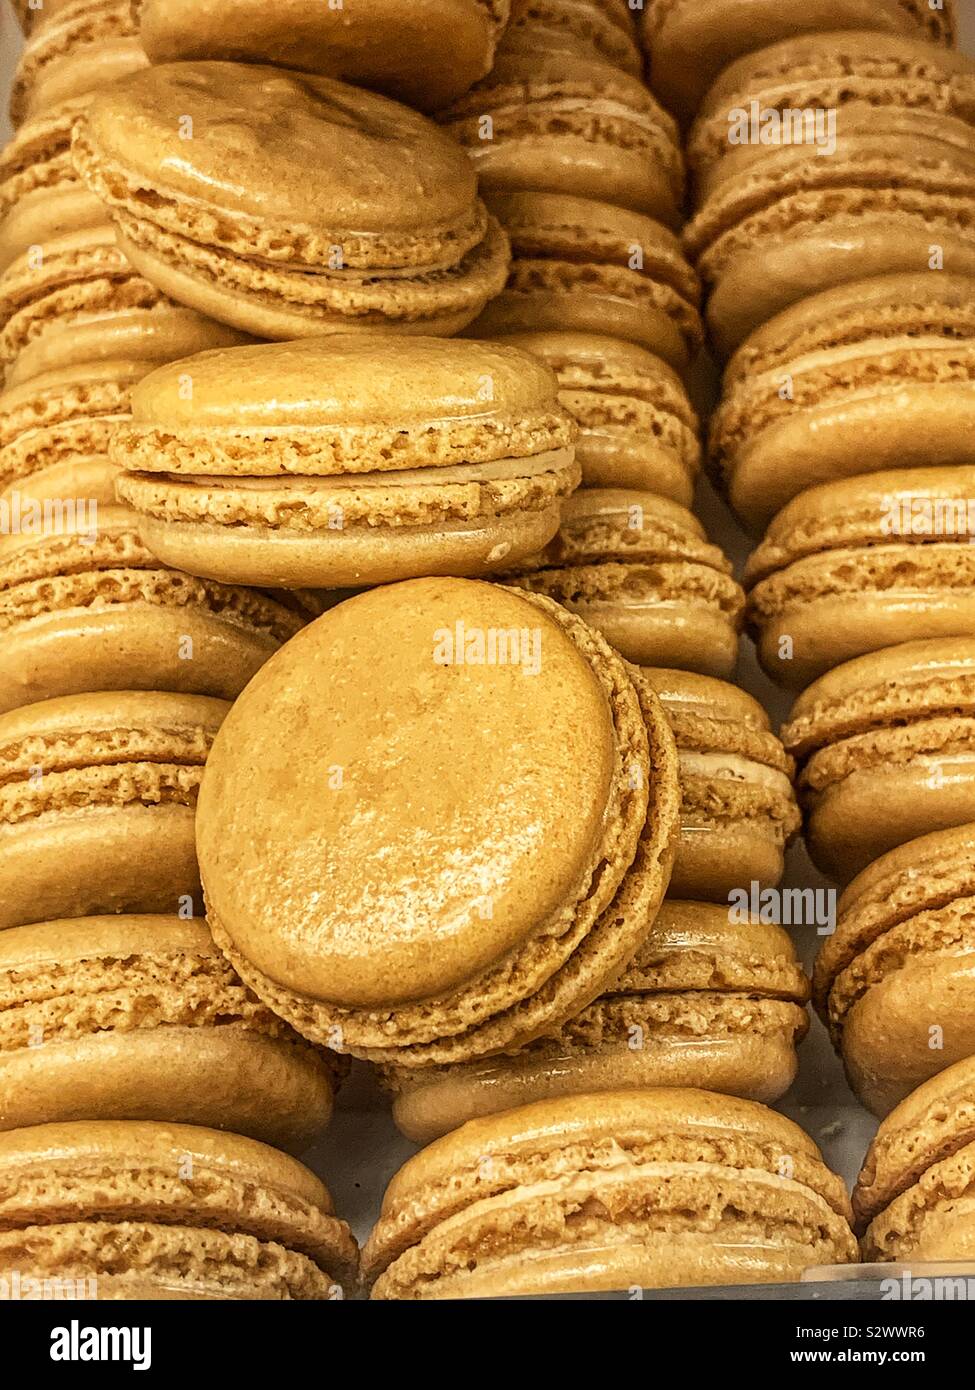 Delicious caramel macaroons sandwich cookies. Stock Photo